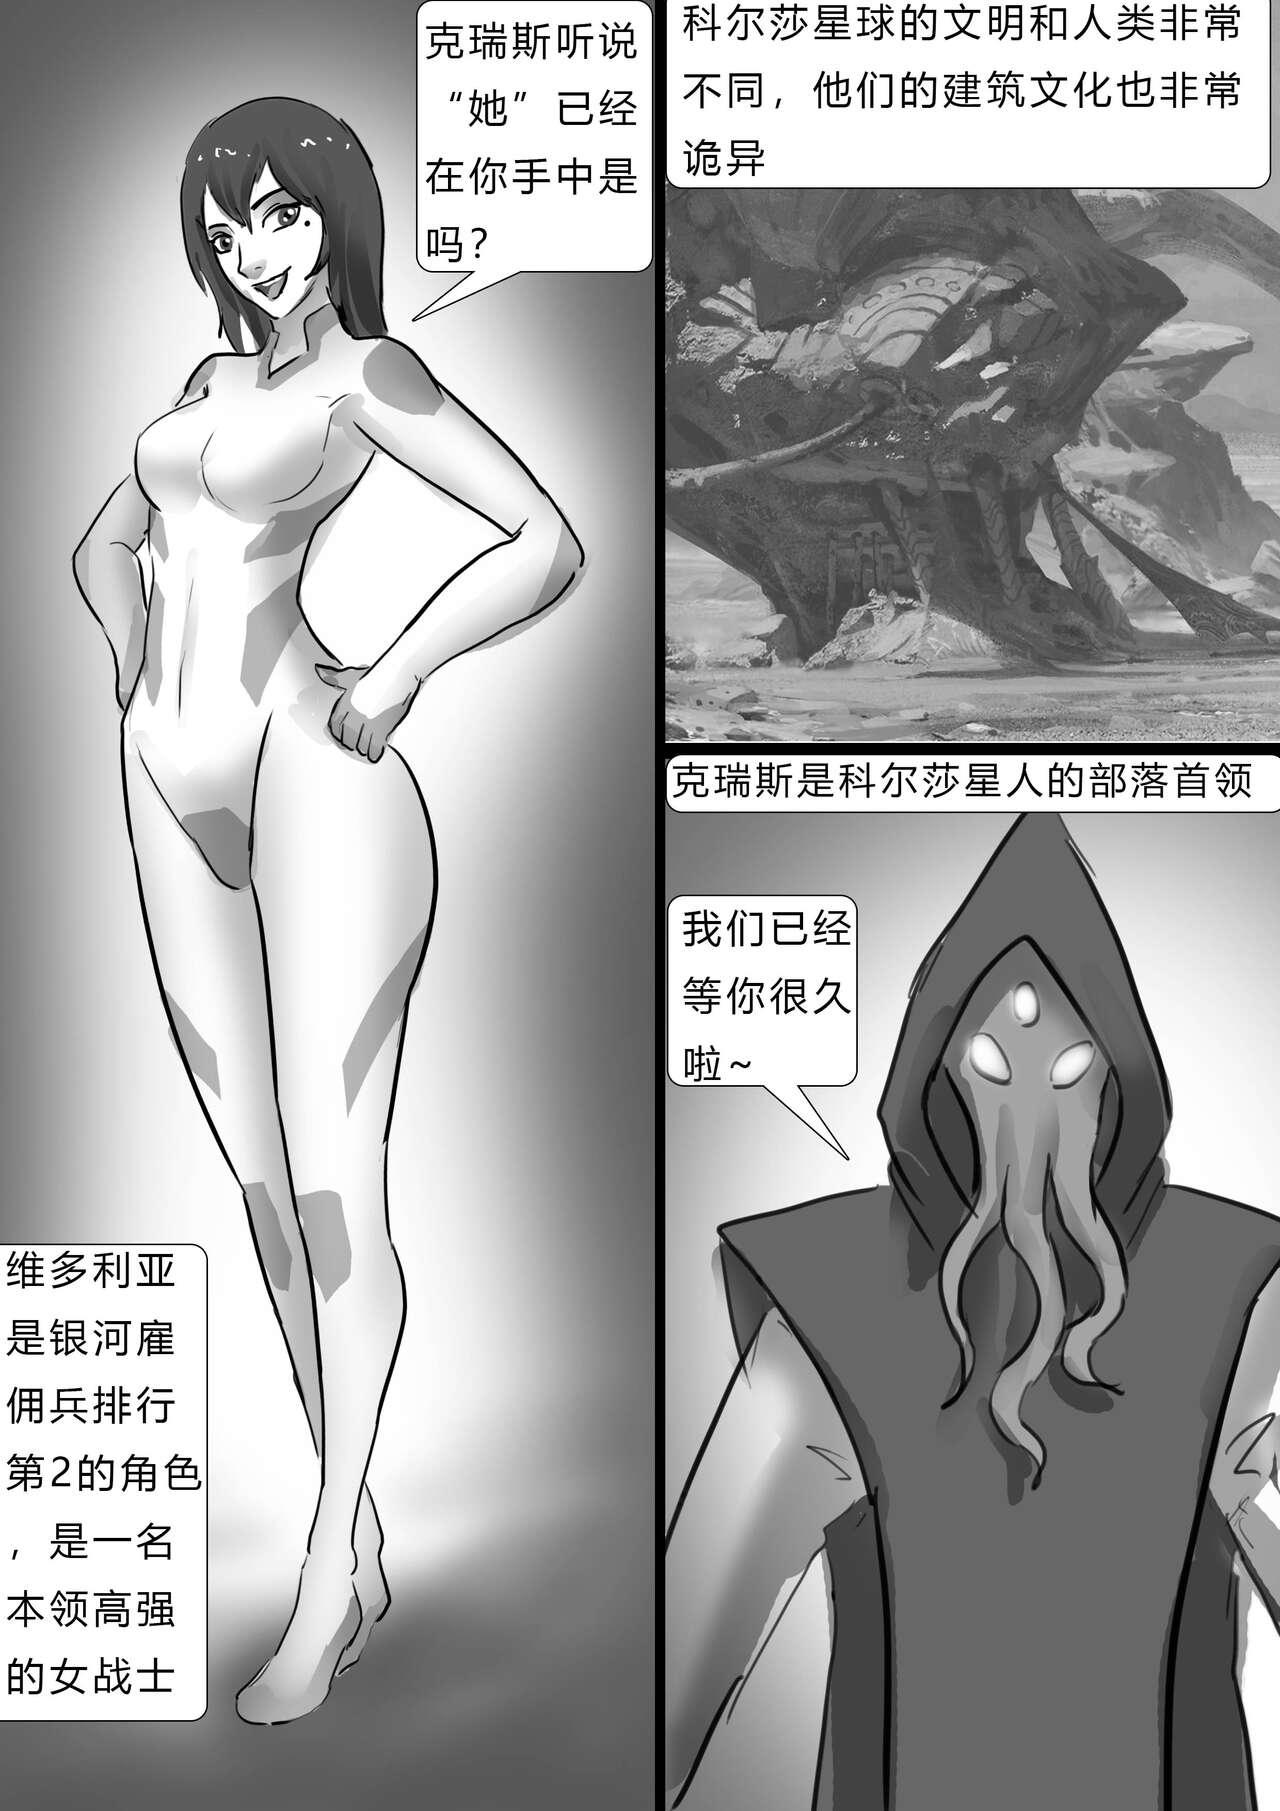 Old And Young 千变女奴 Thousand-change slave girl Deutsche - Page 3